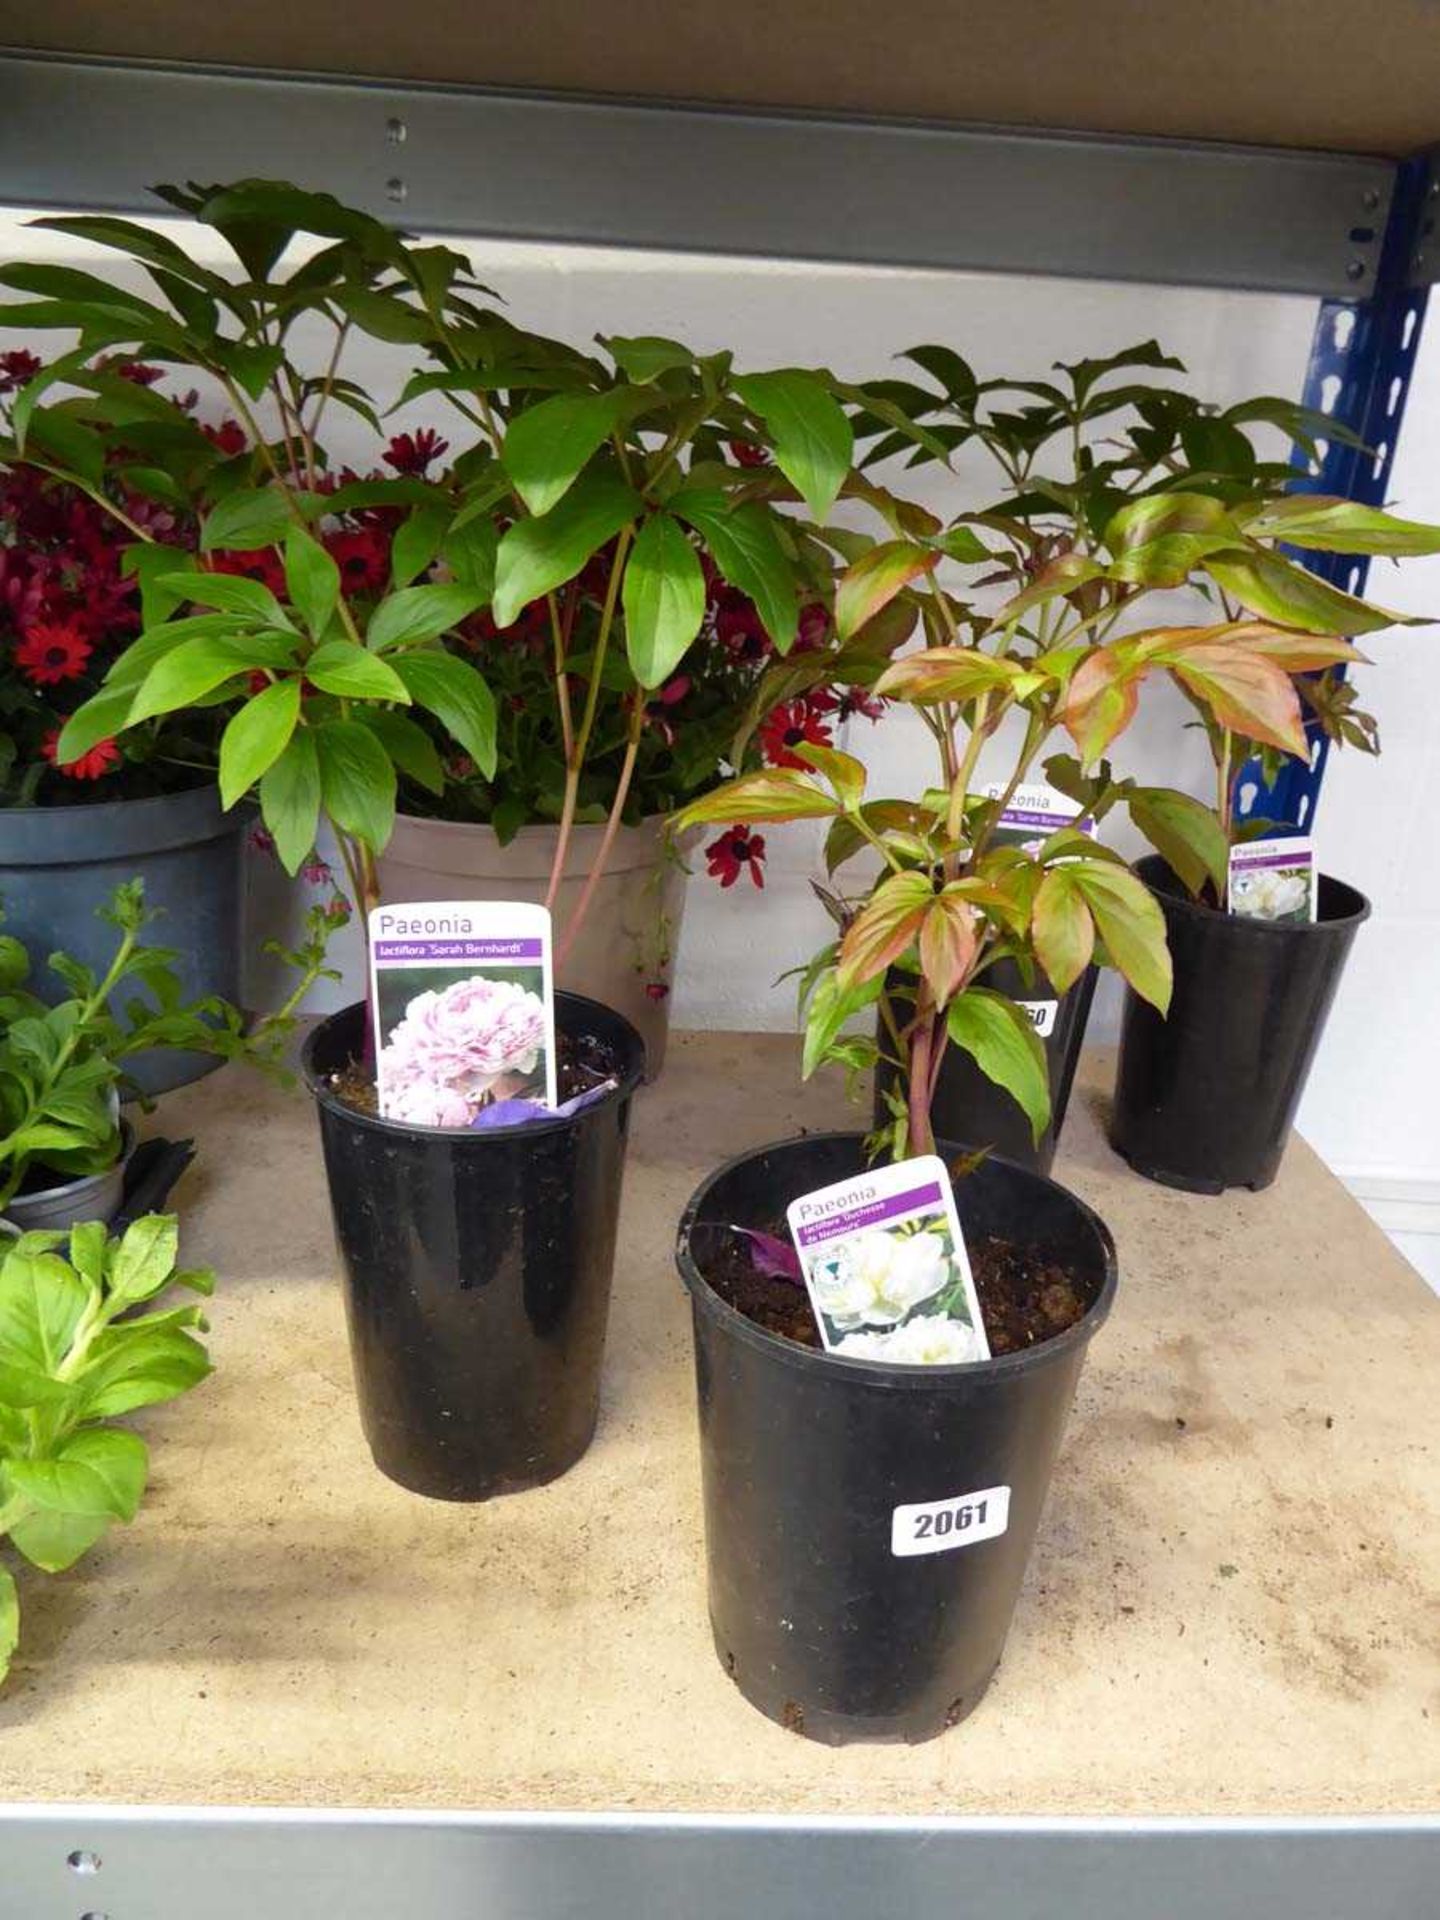 2 potted Paeonia